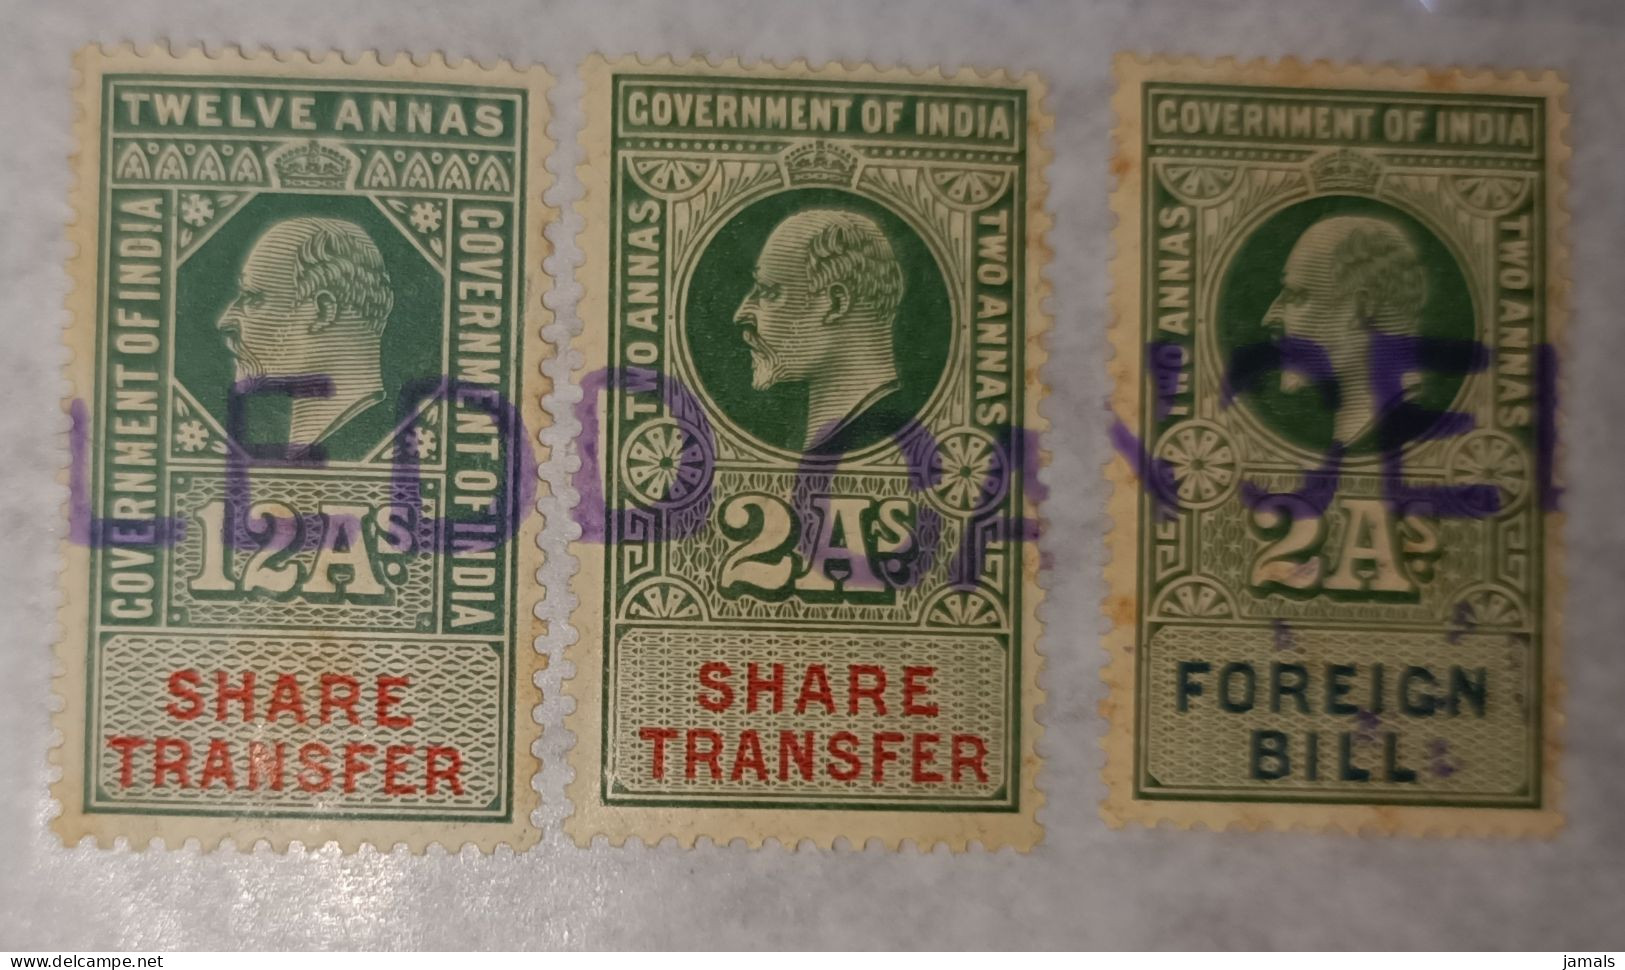 Br India King Edward, Fiscal Revenue Court Fee Share Transfer, Foreign Bill, Cancelled Handstamp, MNH Inde Indien - 1902-11 King Edward VII